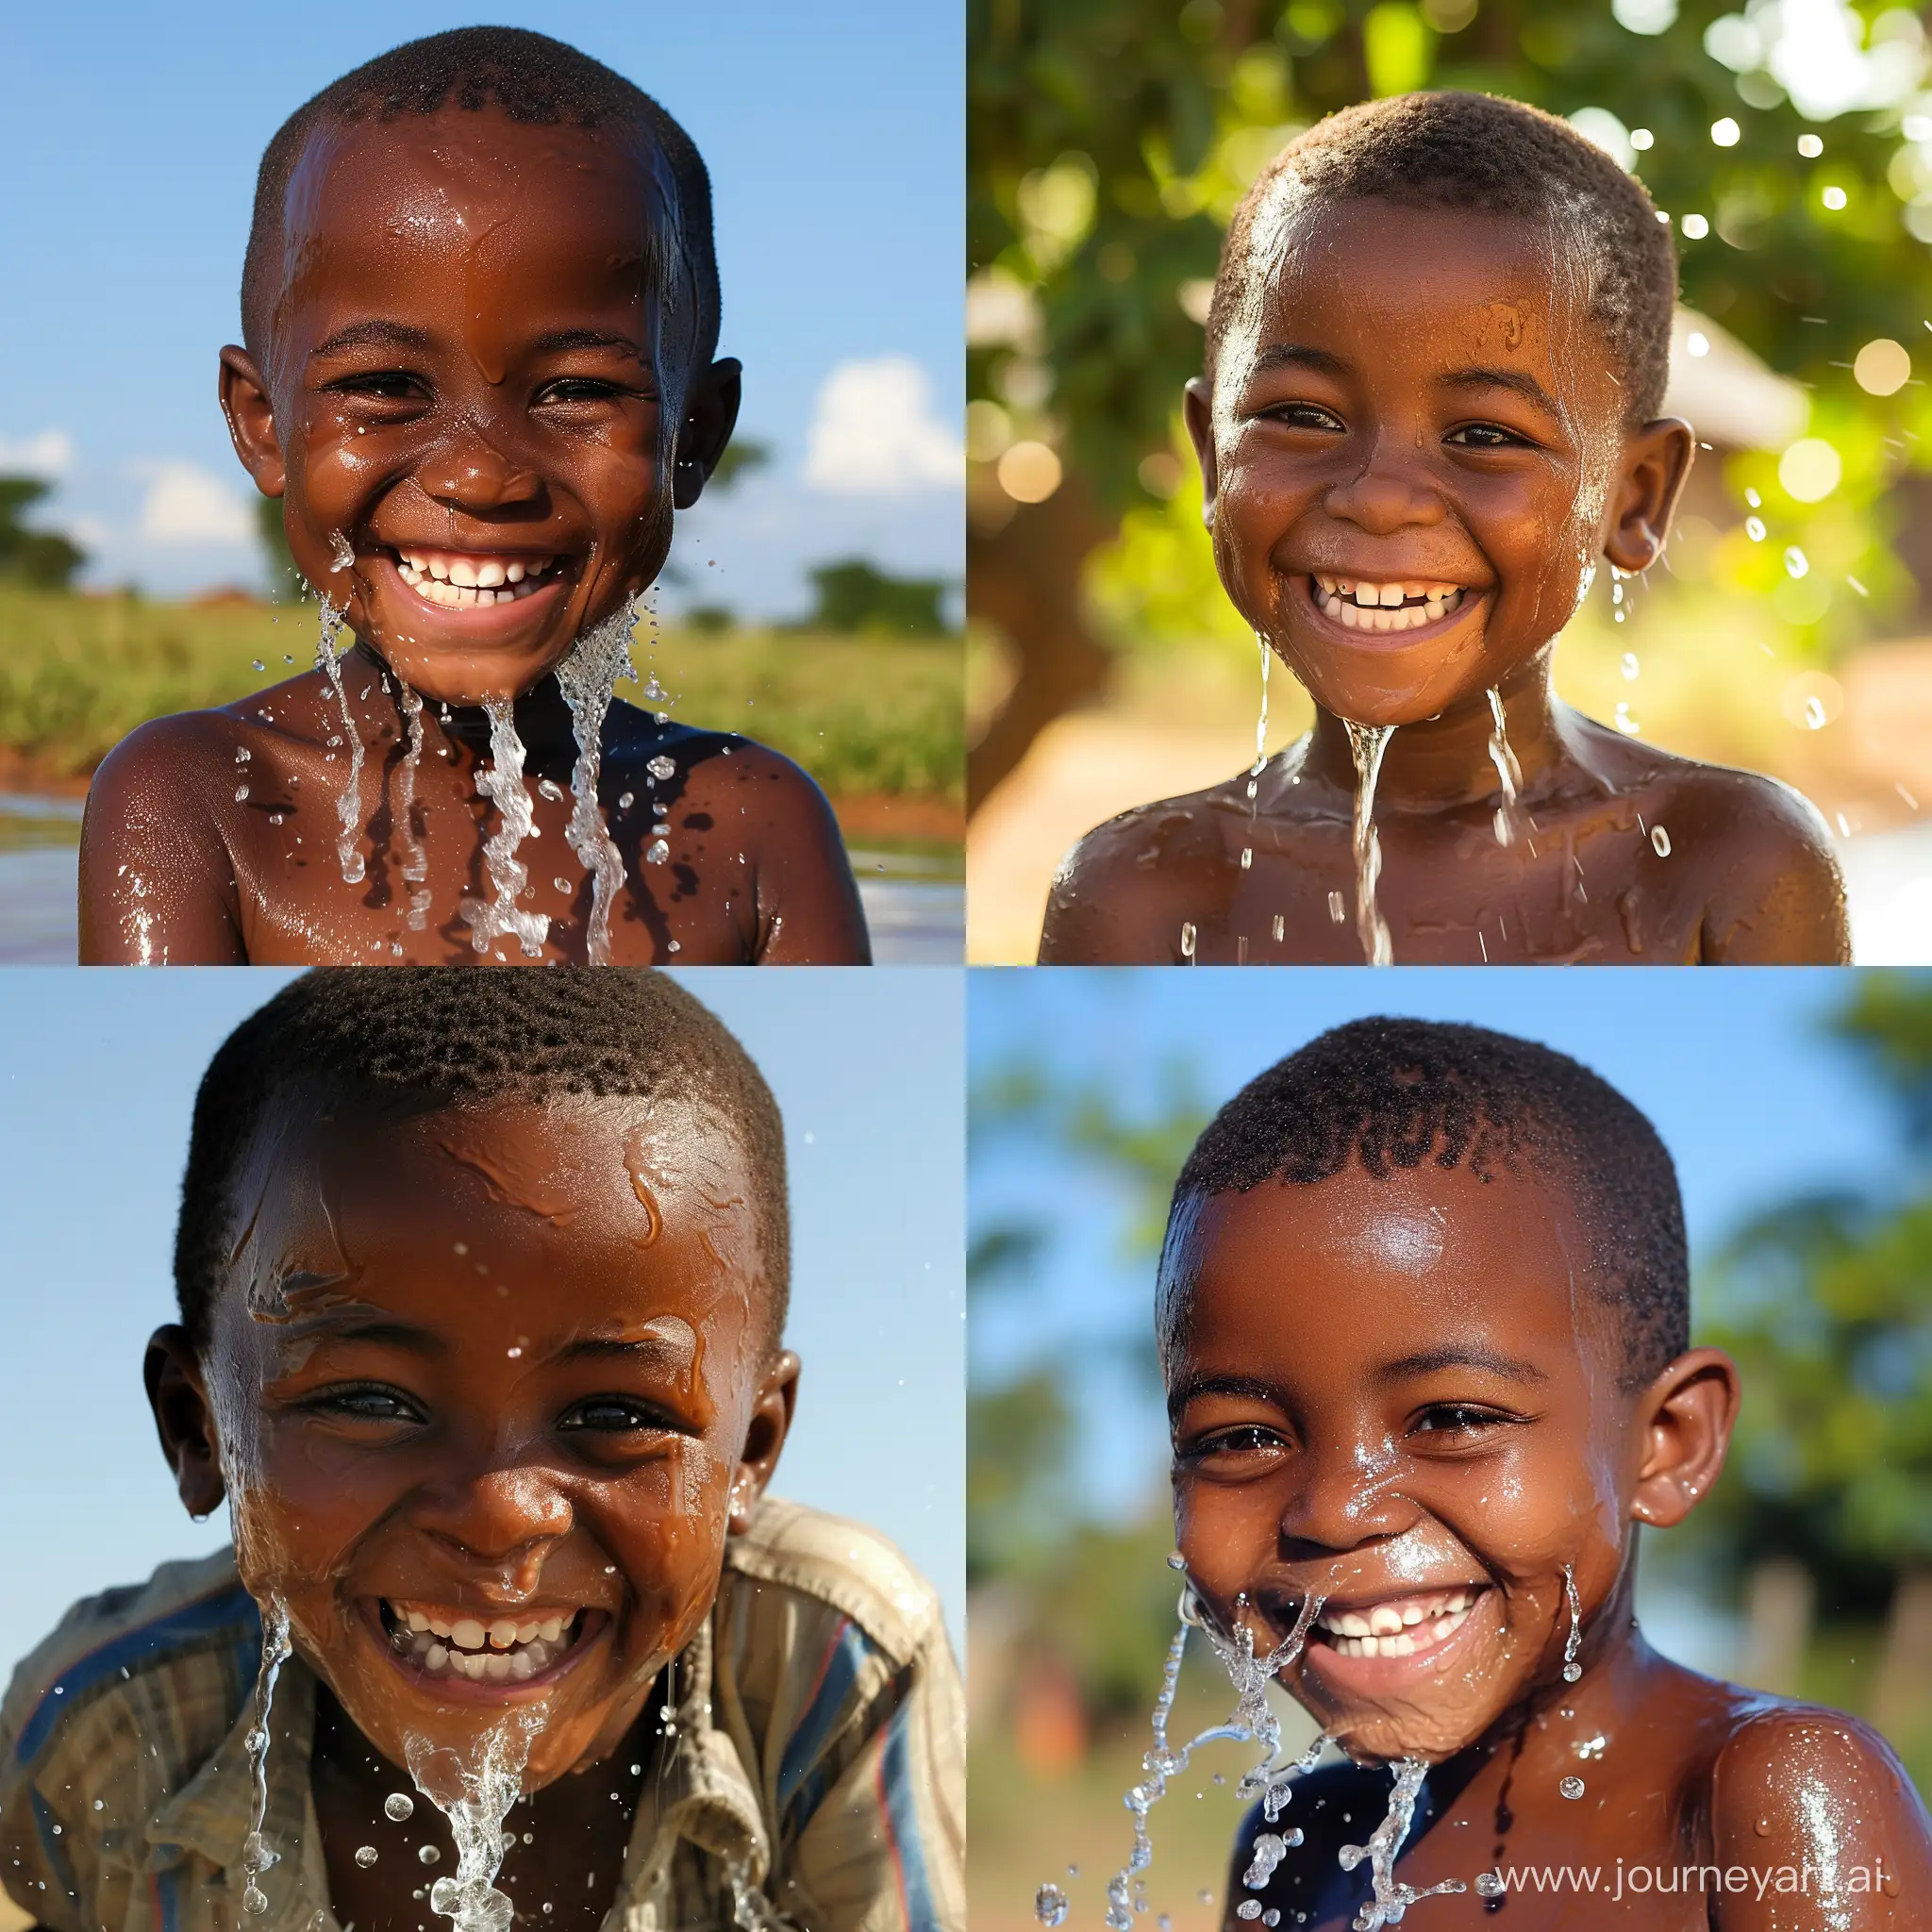 African boy smiling with water flowing down his face on a sunny day